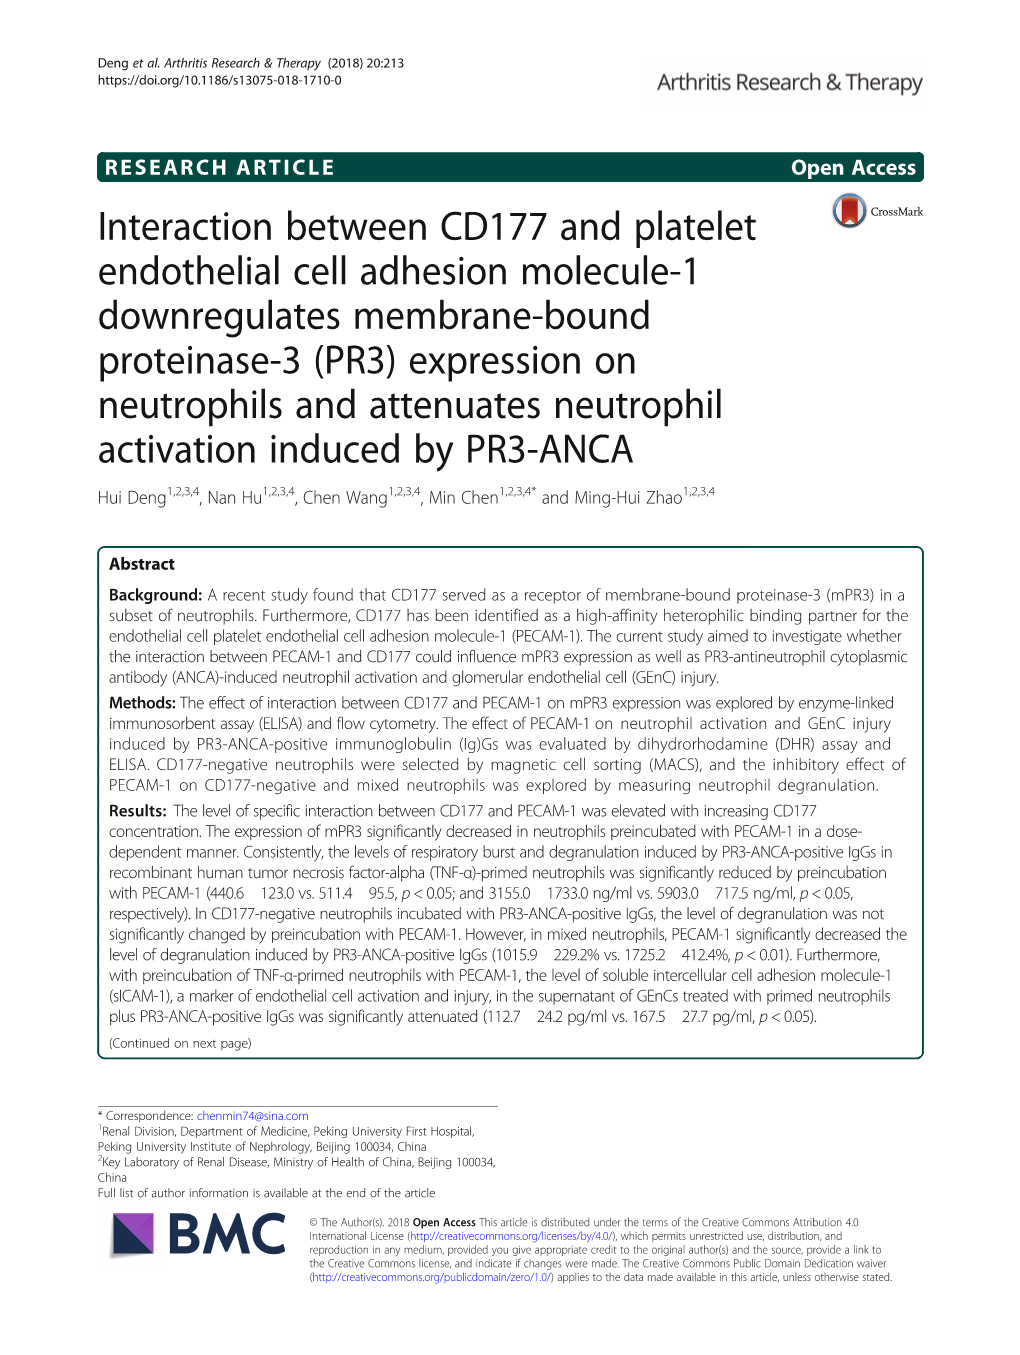 Interaction Between CD177 and Platelet Endothelial Cell Adhesion